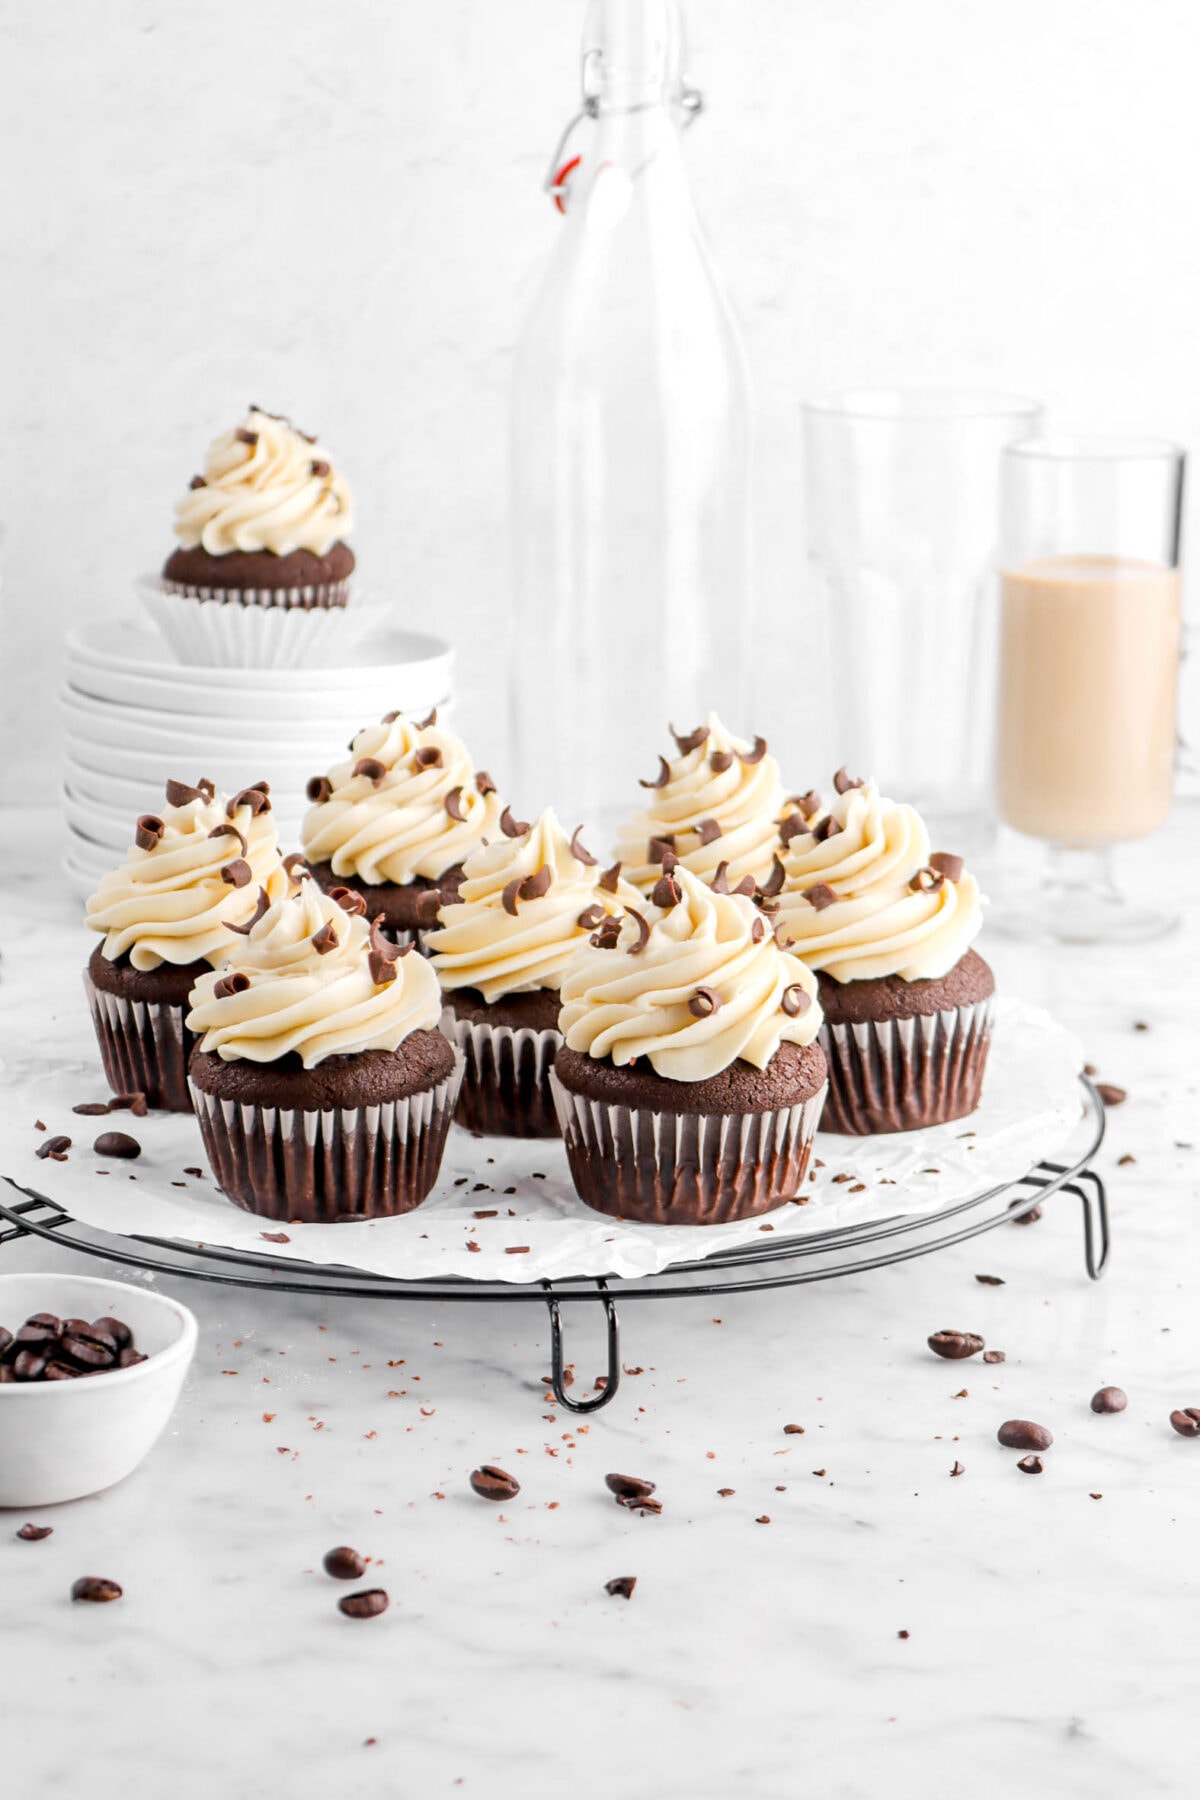 pulled back photo of five chocolate espresso cupcakes on wire cooling rack with coffee beans and chocolate curls around, a stack of white plates, two empty glasses, and a glass of irish cream behind